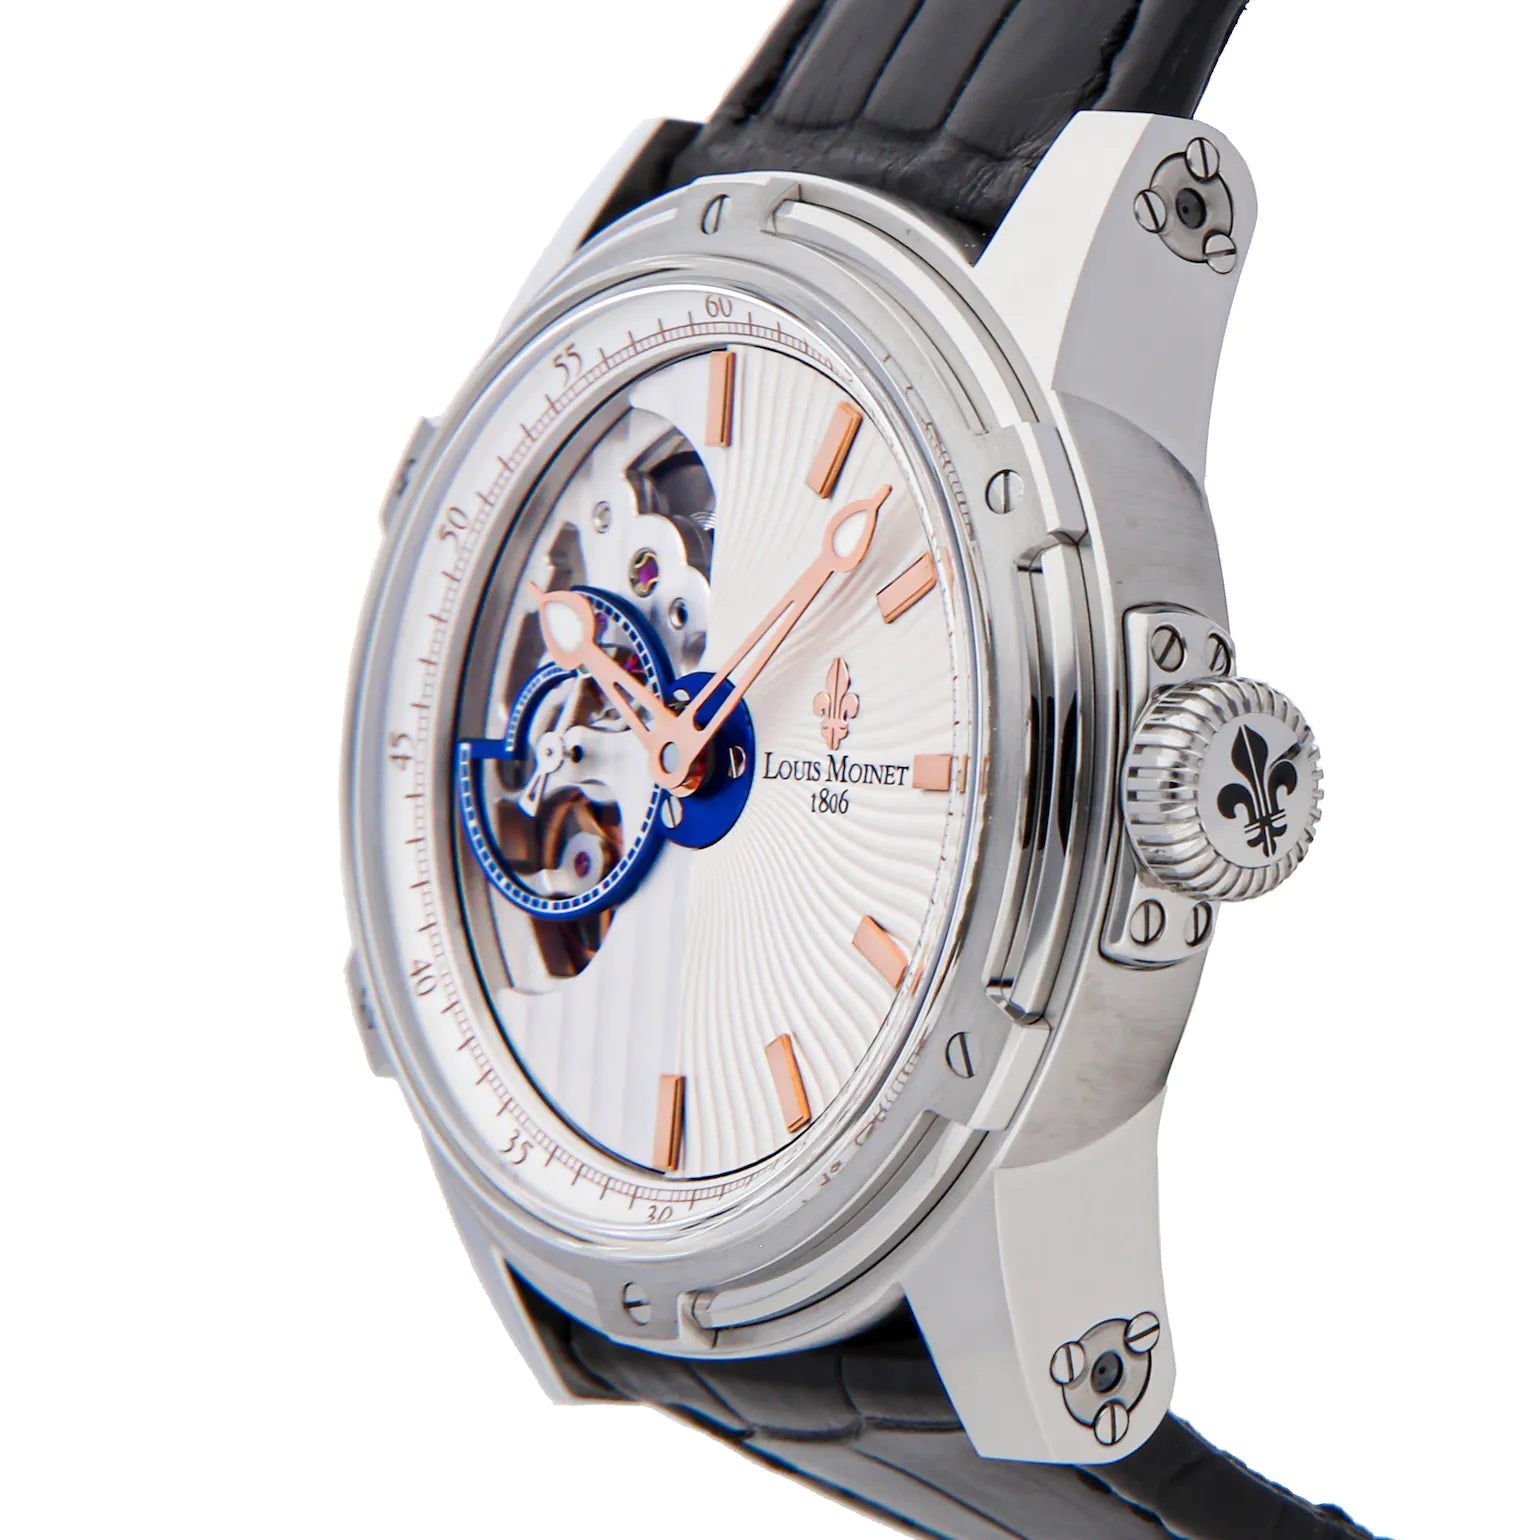 Louis Moinet LM-45.10B.MO Moon Stainless Steel Limited Edition